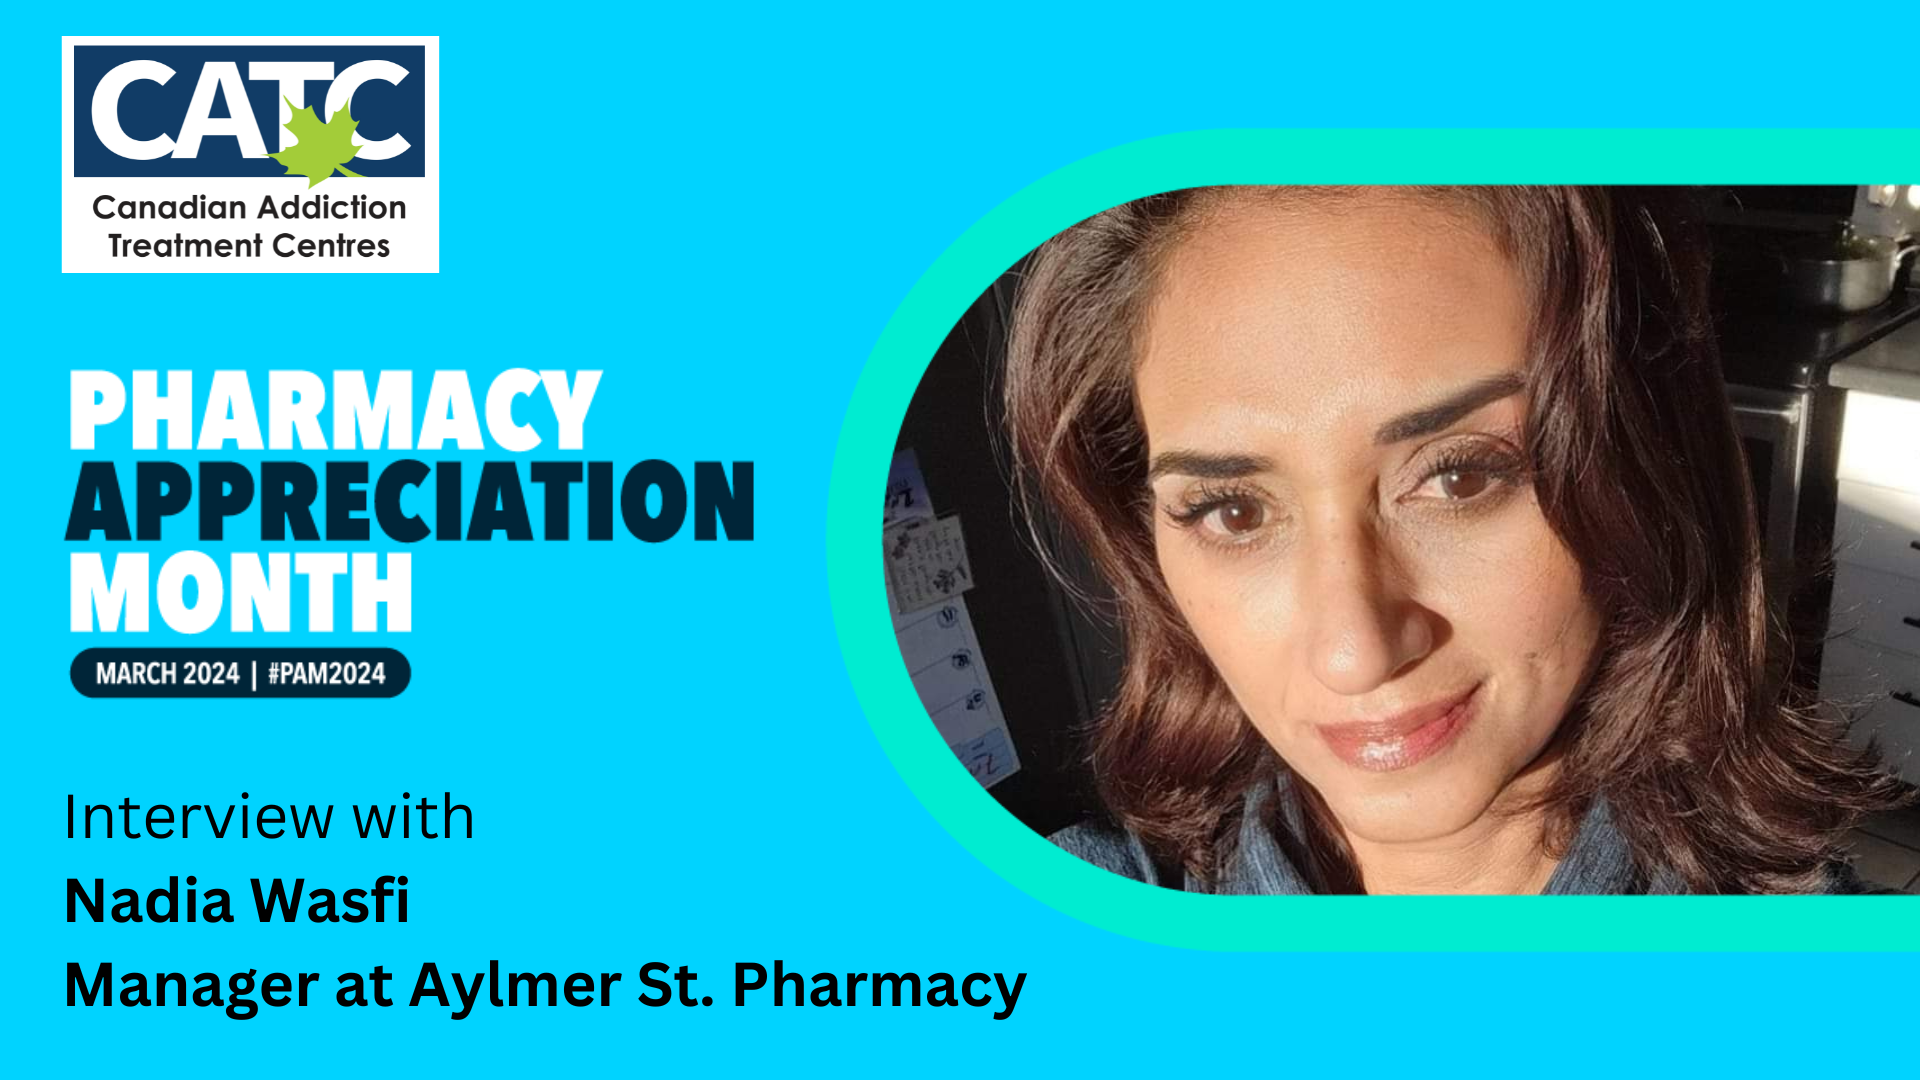 Nadia Wasfi, interview during pharmacy appreciation month